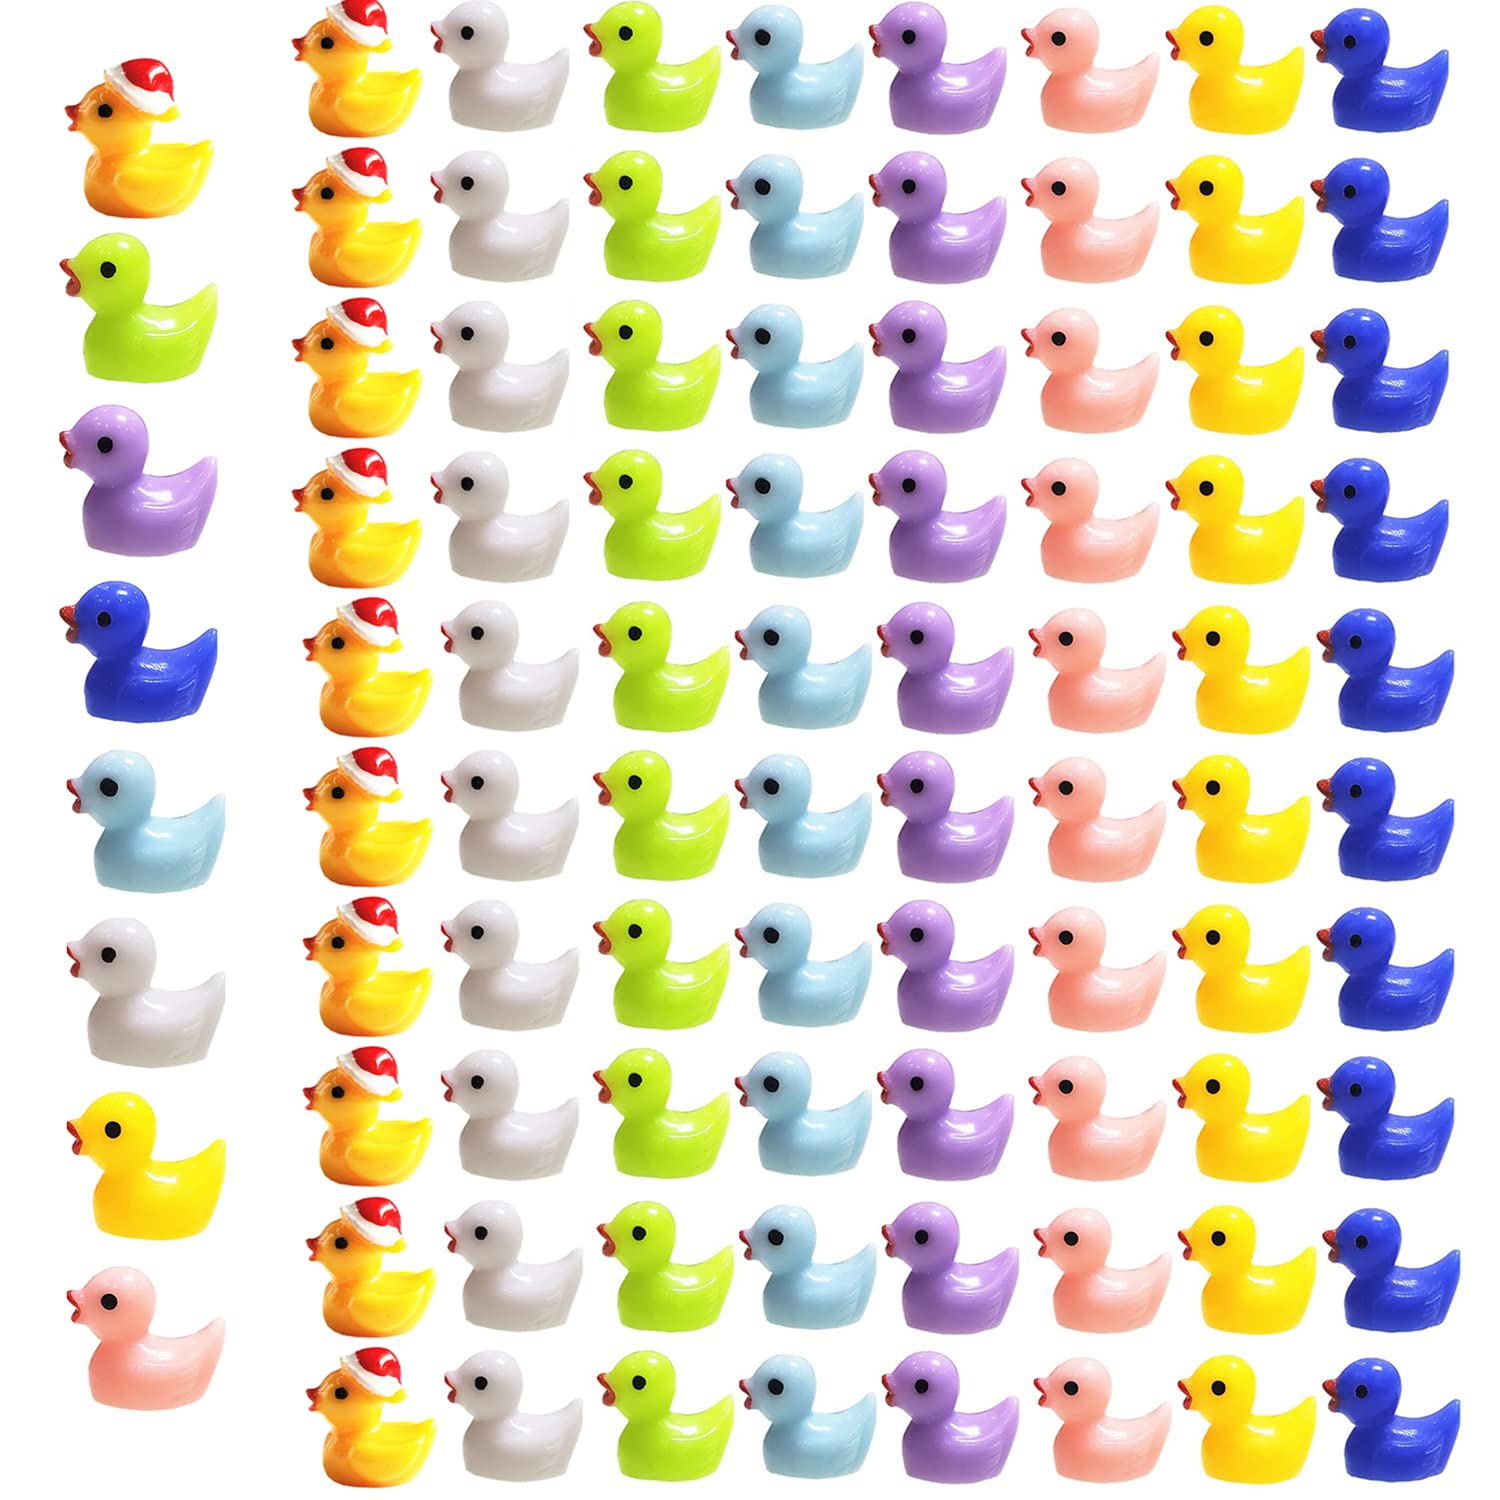 80 Pieces Mini Ducks, 8 Colors Miniature Figures for Fairy Gardens, Aquariums, Dollhouses, and Potted Plants. Perfect for DIY Slime Charms and Decorations.